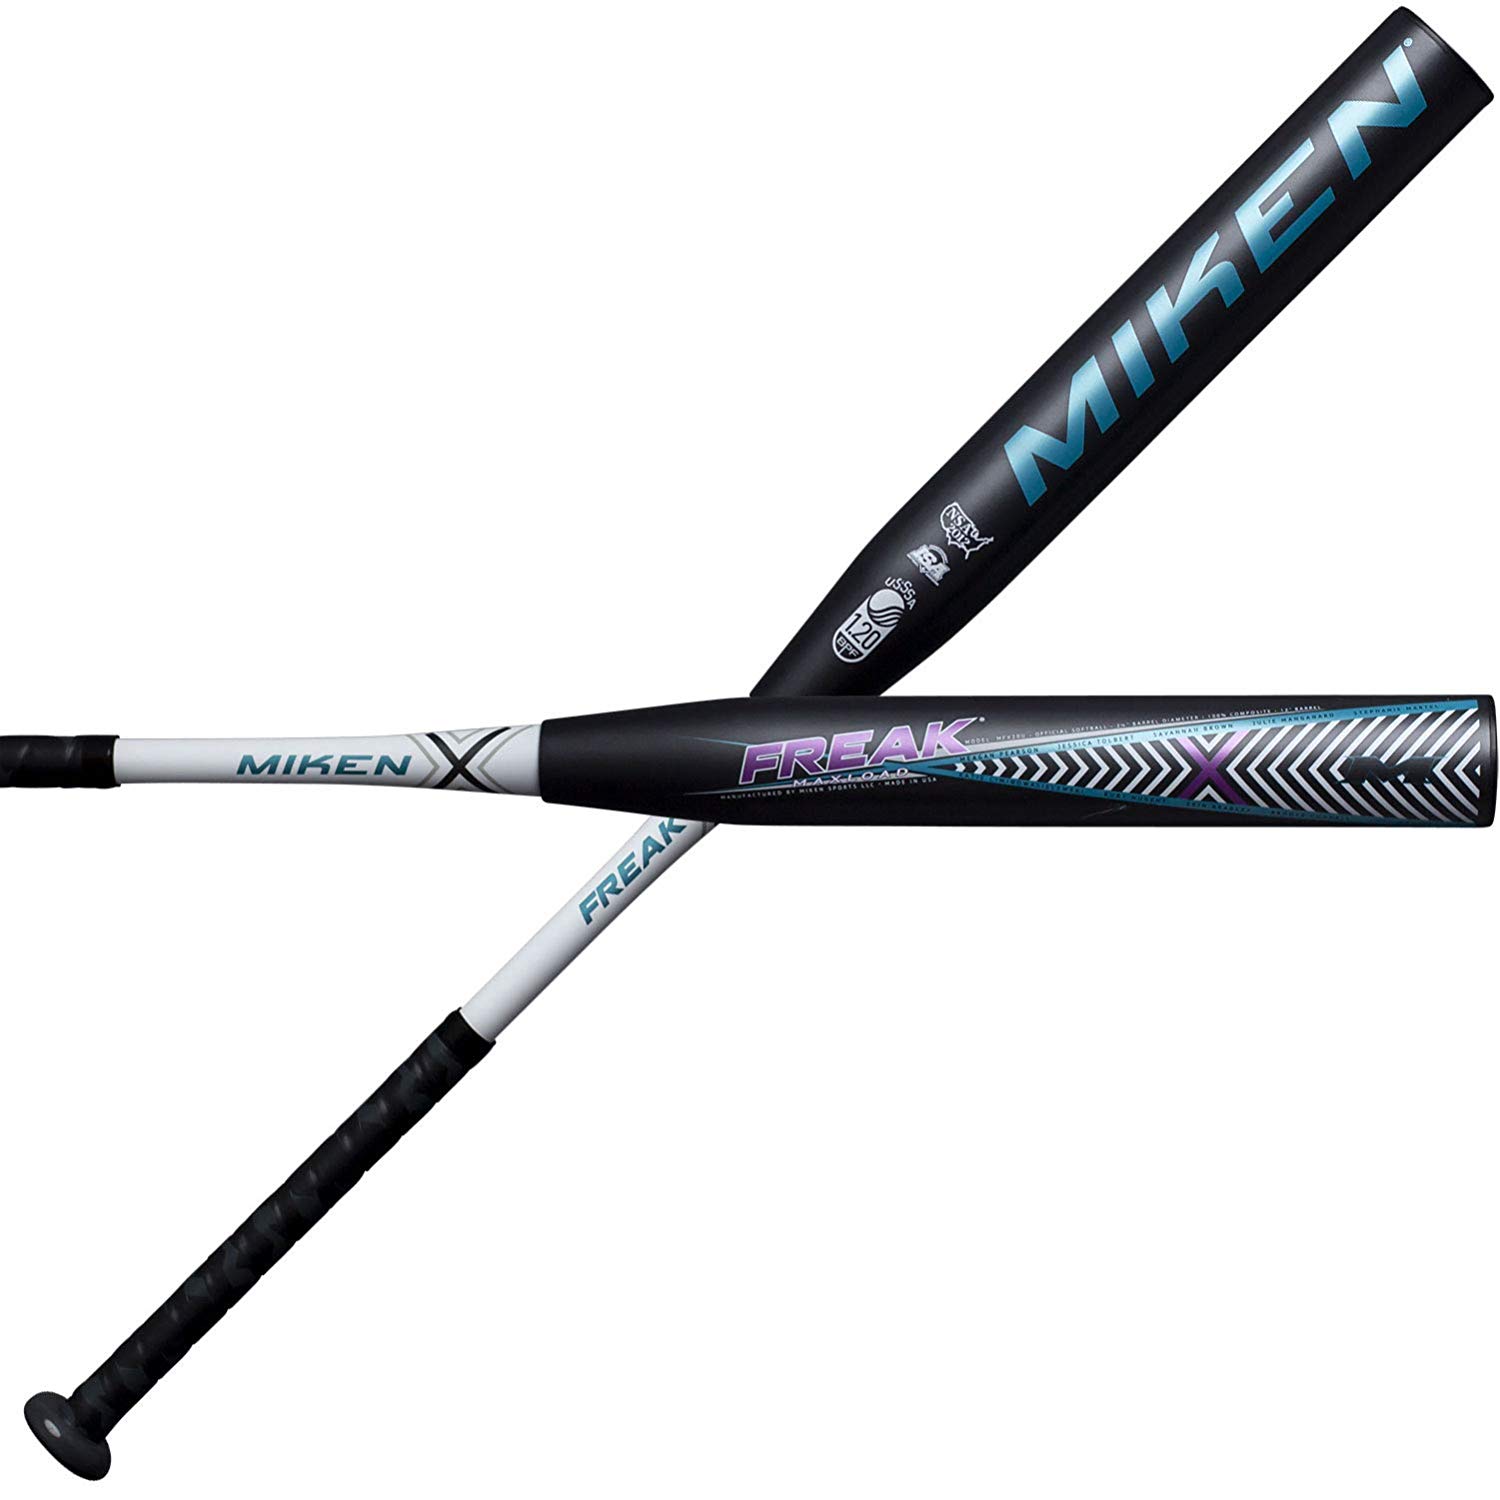 miken-2020-freak-x-maxload-female-usssa-slow-pitch-softball-bat-34-inch-24-oz MFX20U-3-24 Miken 658925042997 EXTENDED SWEET SPOT AND INCREASED FLEX due to 14 inch barrel